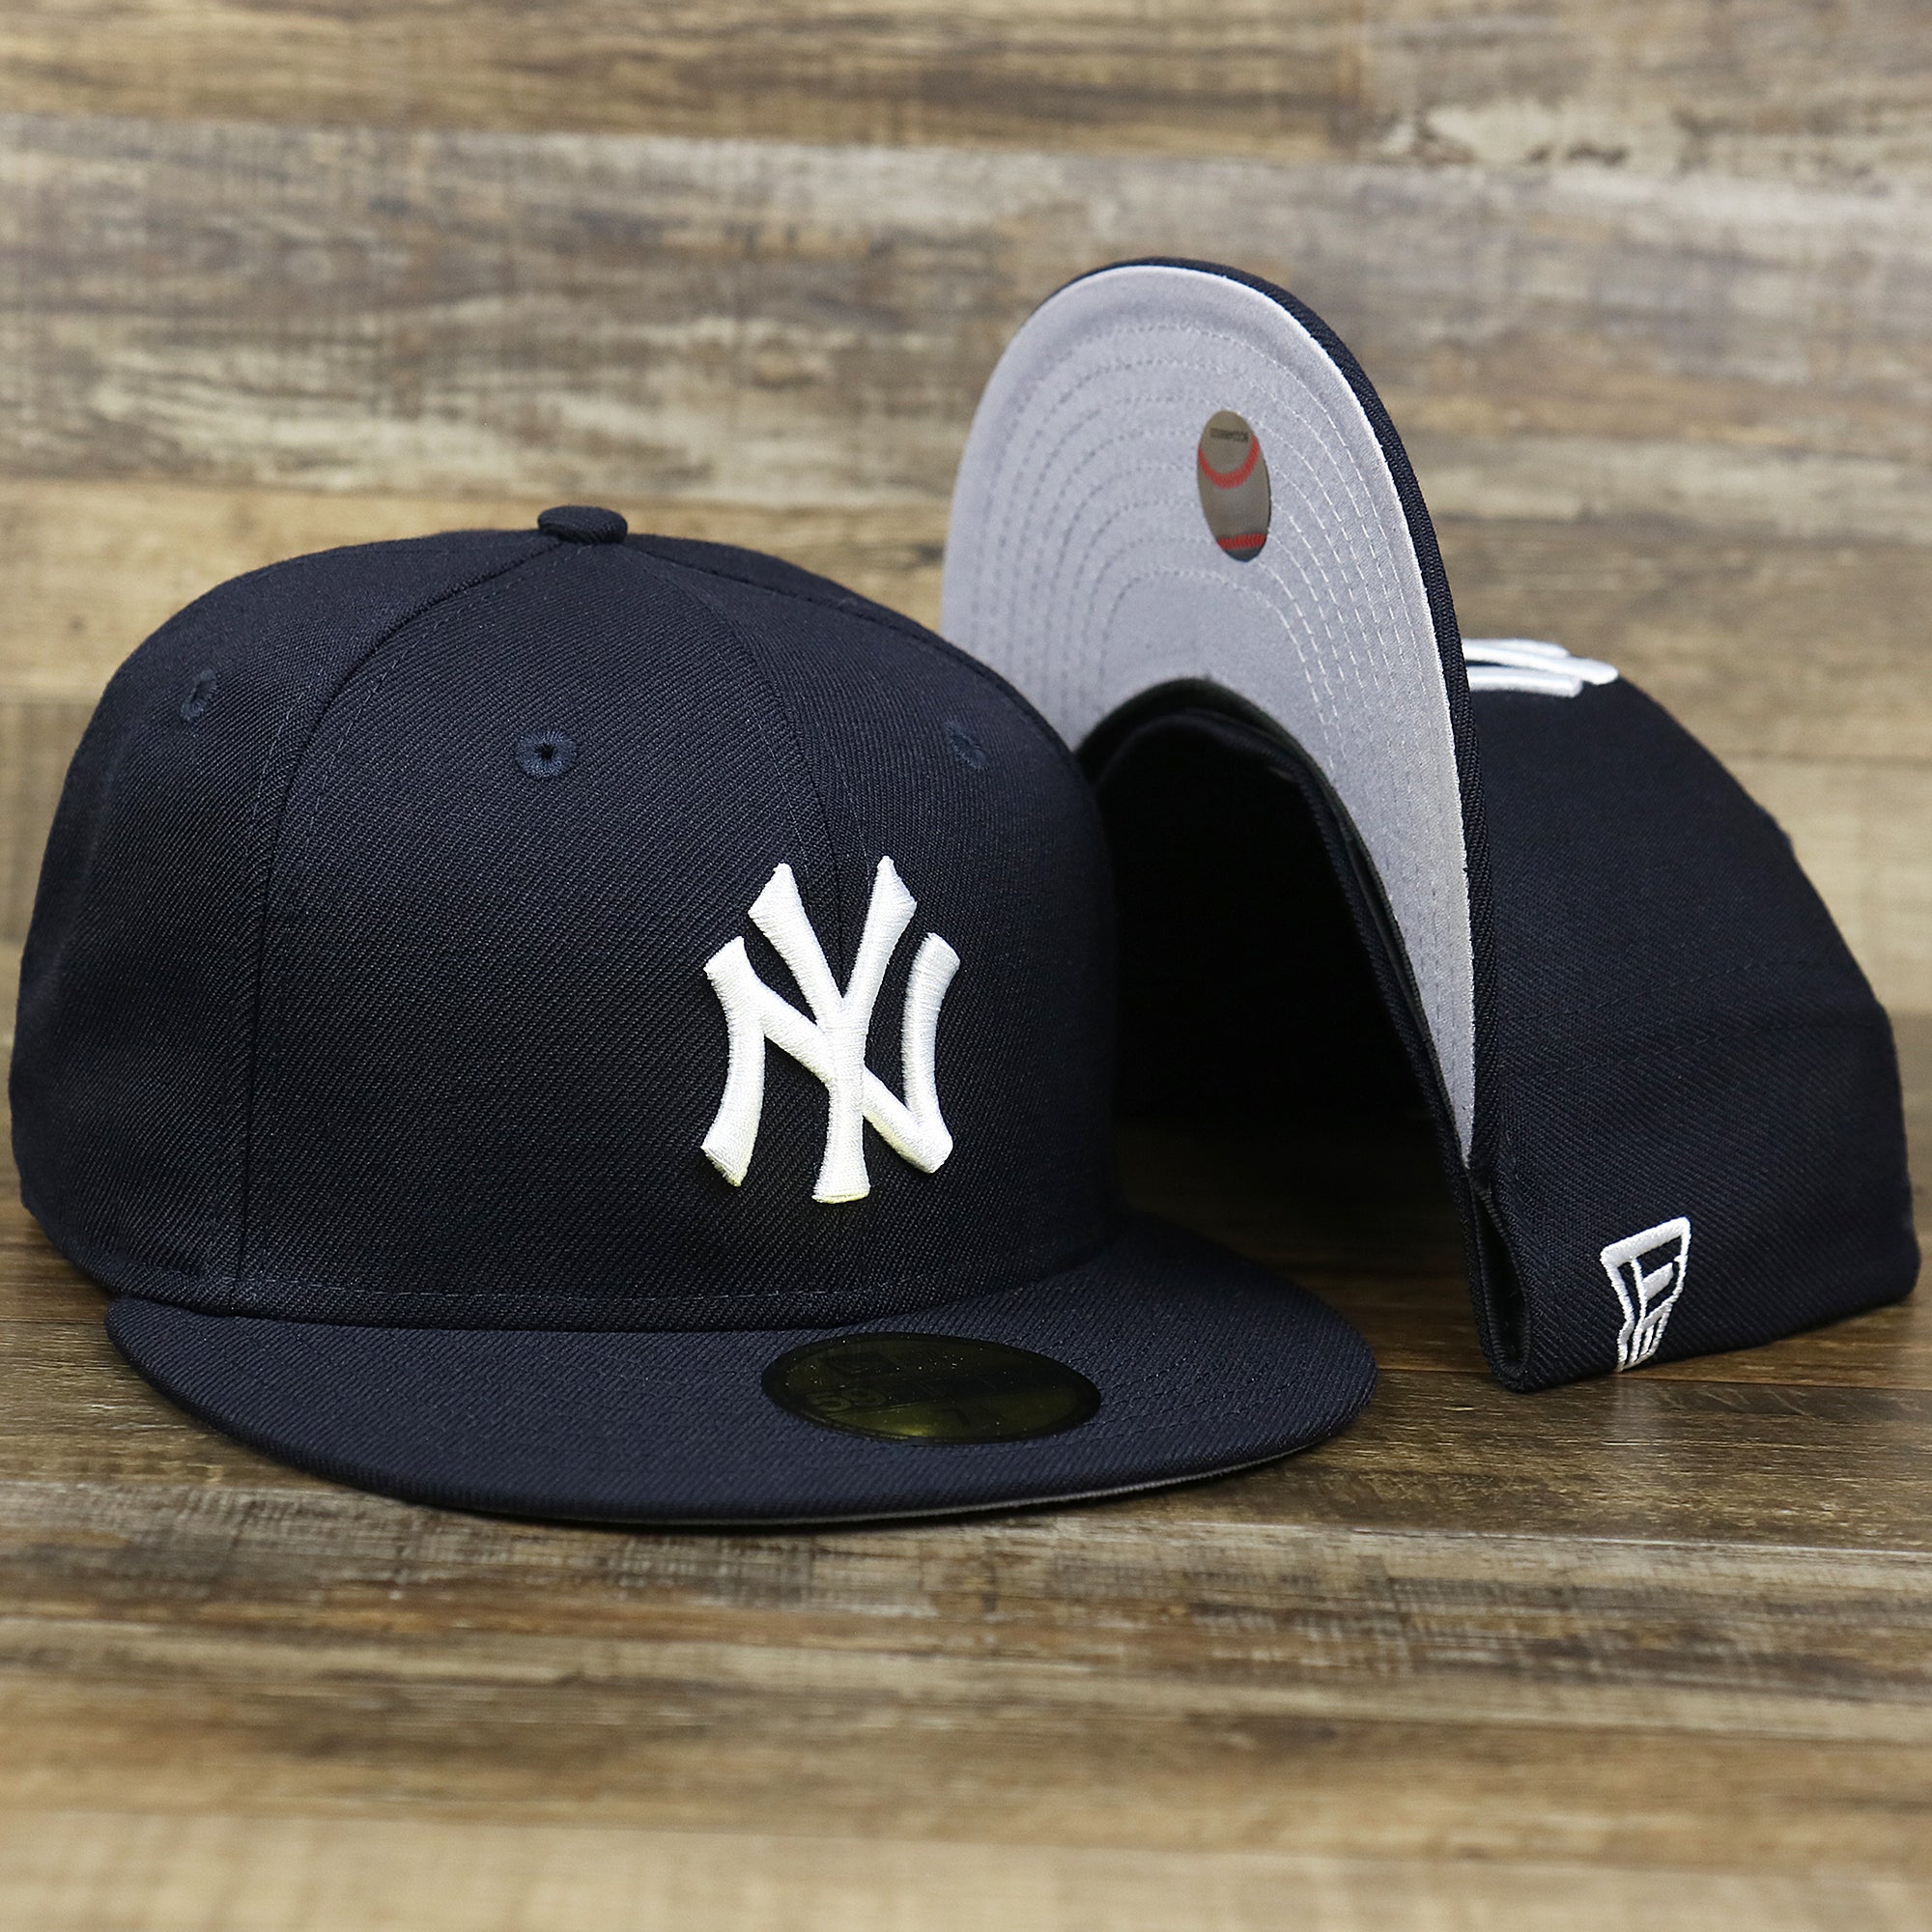 Available on Capswag.com: New York Yankees x Mets Split Fitted Hat